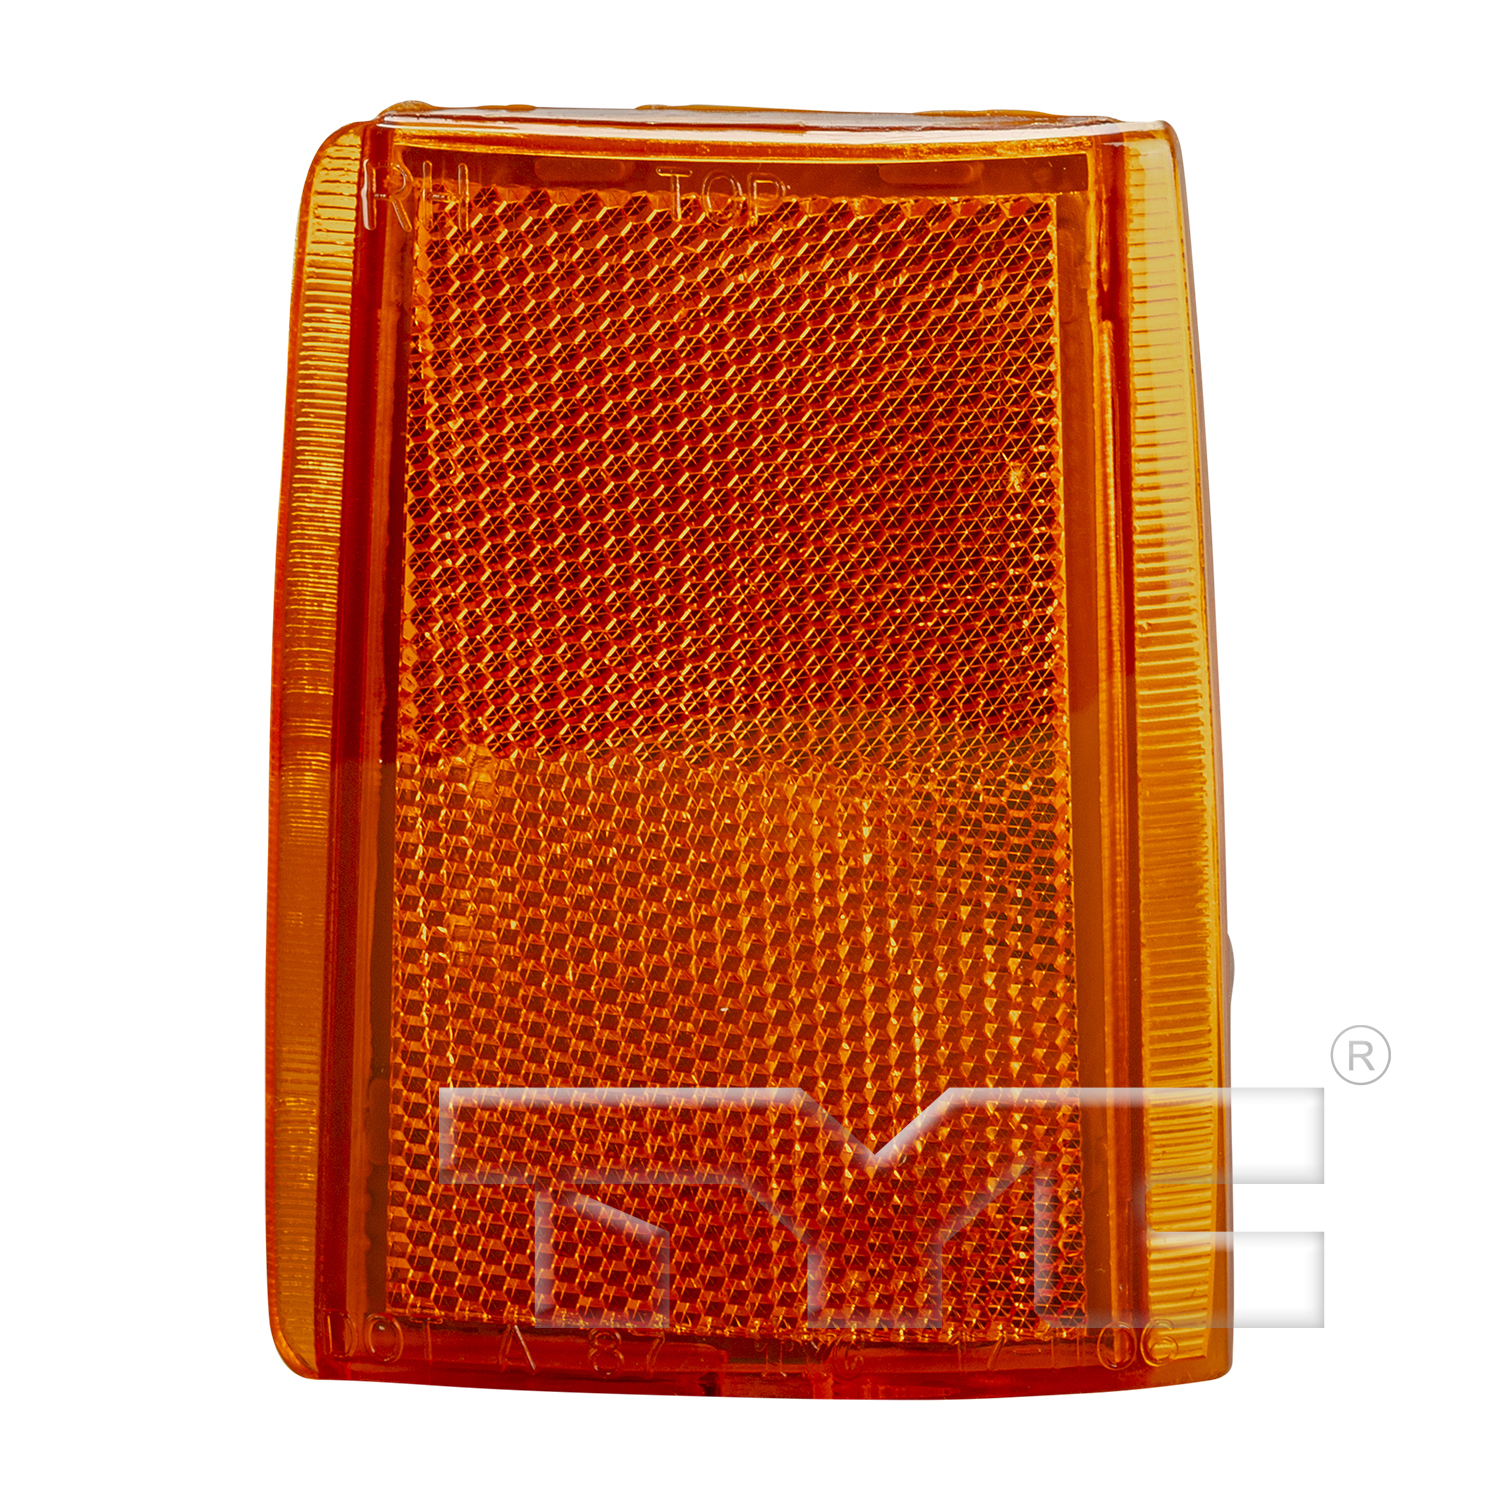 Aftermarket LAMPS for CHEVROLET - K2500 SUBURBAN, K2500 SUBURBAN,92-93,RT Front side reflector